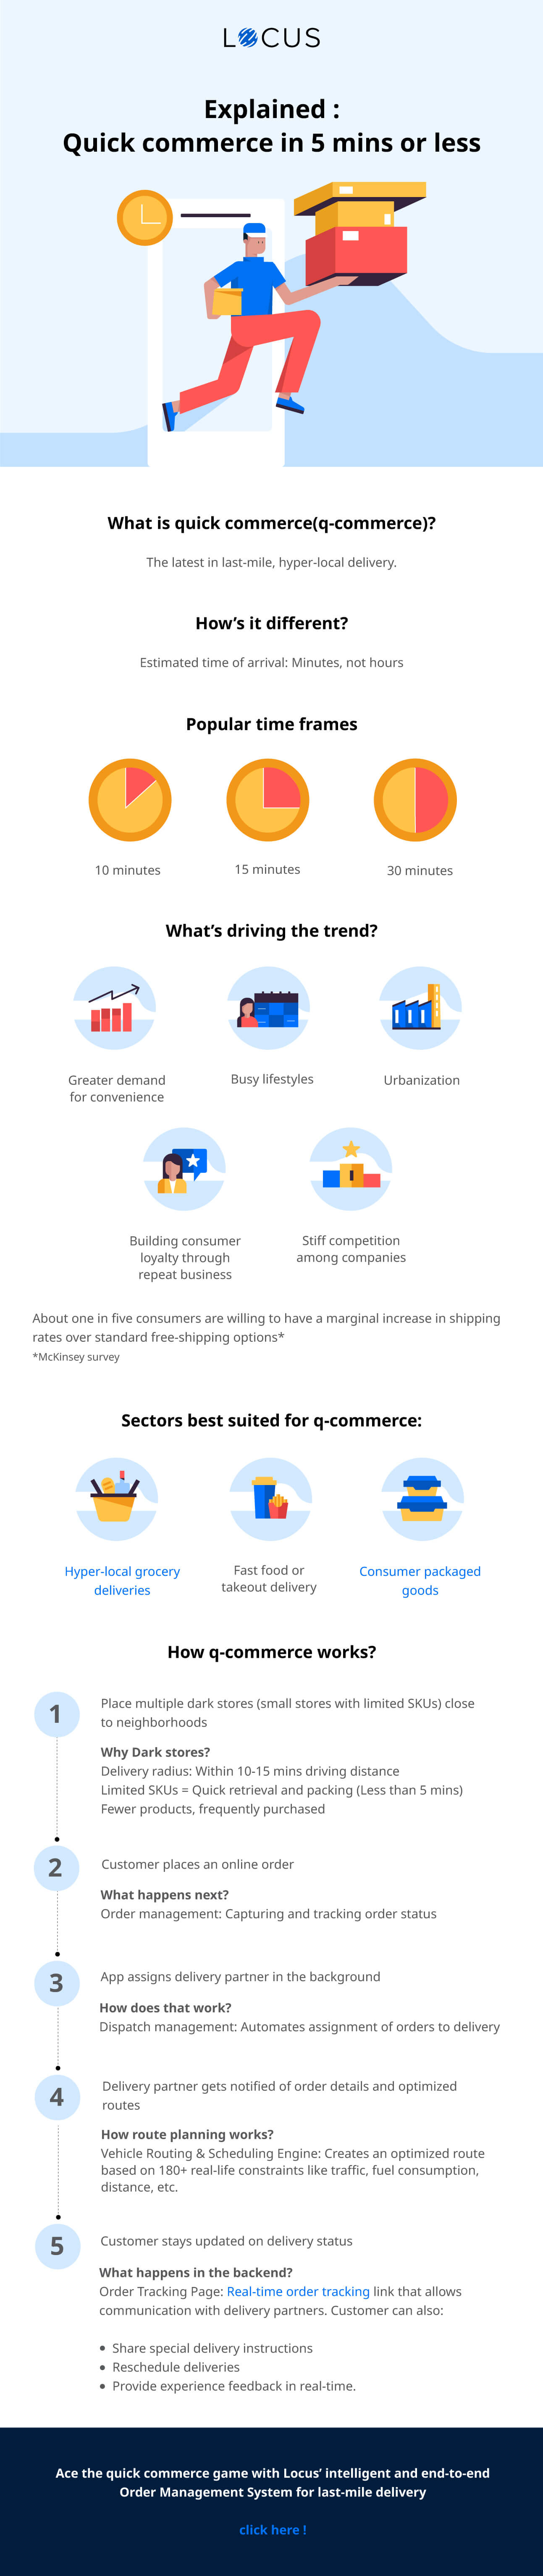 How Quick Commerce Works & How Is It Different | Locus